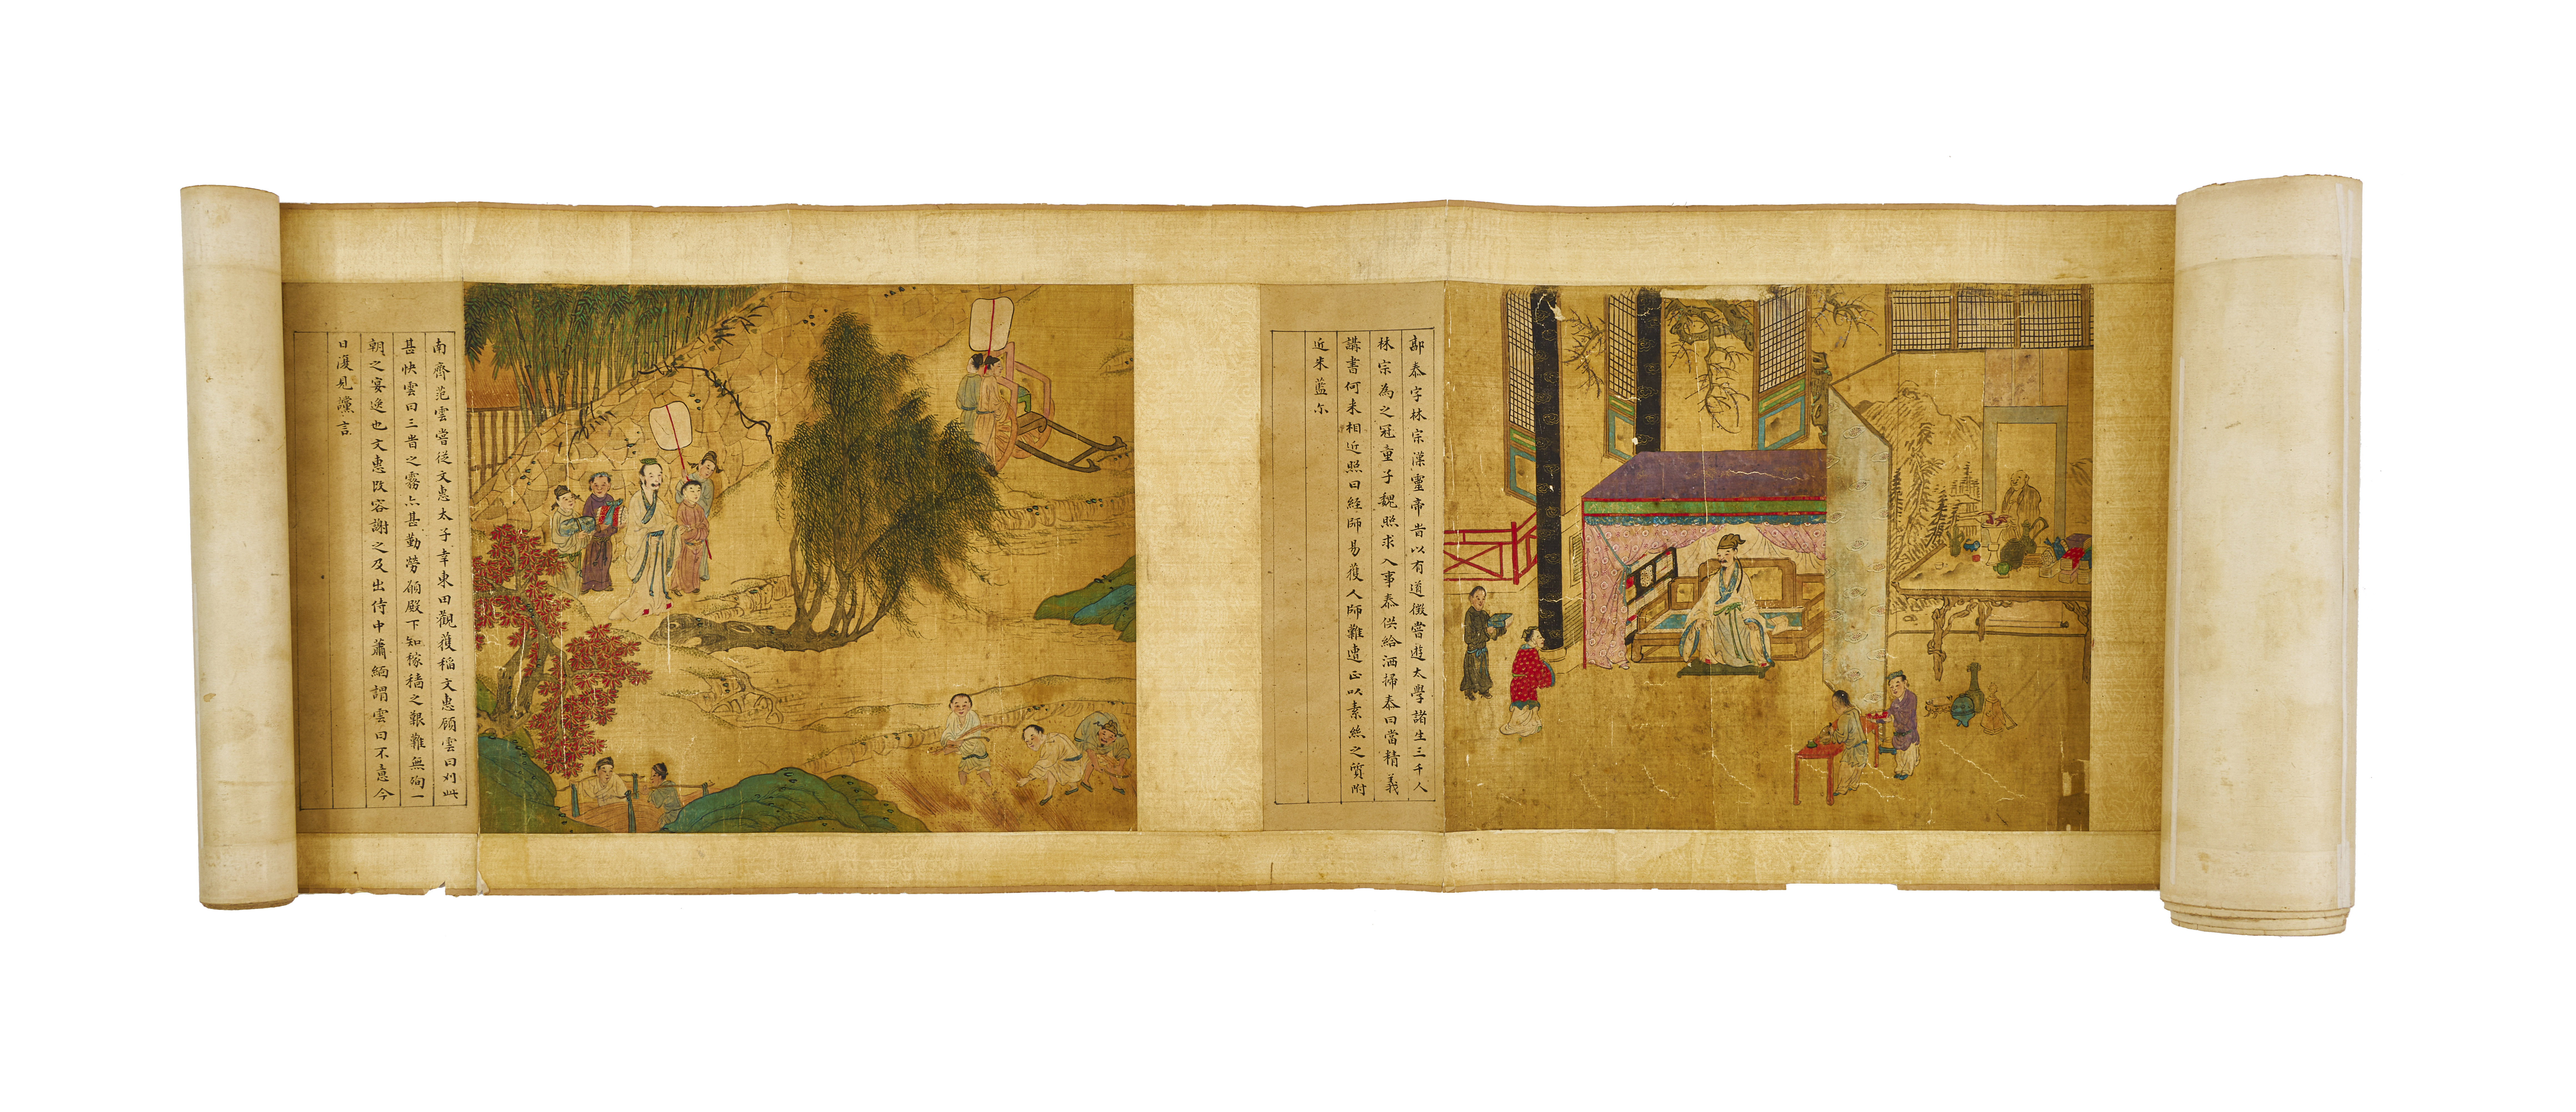 A LANDSCAPE & CALLIGRAPHY SCROLL, QING DYNASTY (1644-1911) - Image 3 of 7